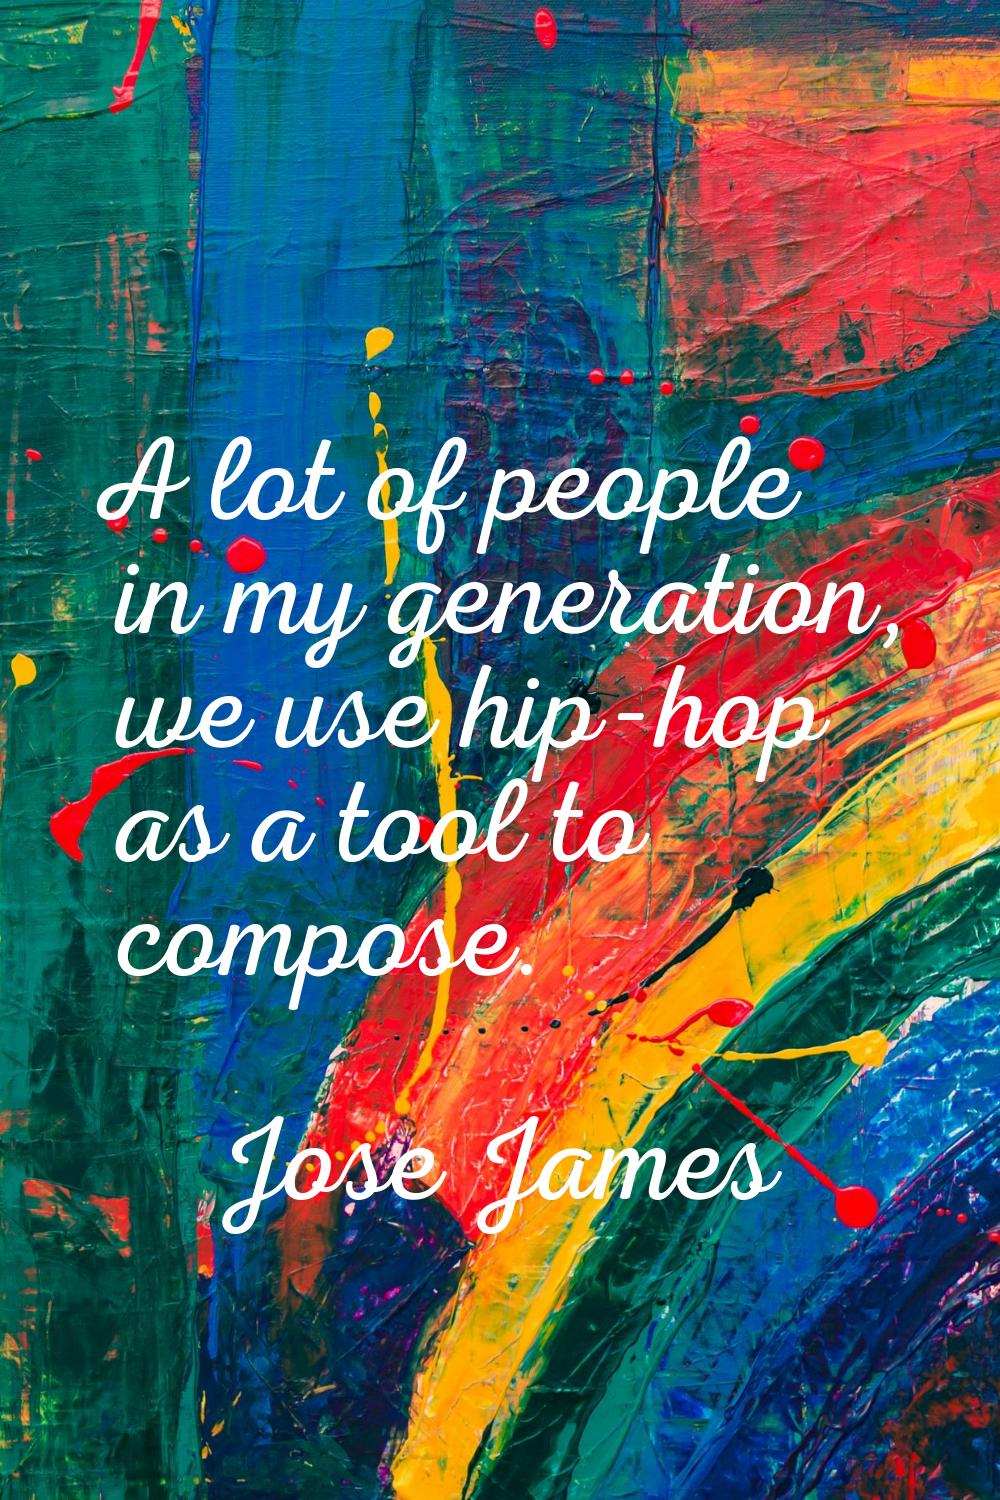 A lot of people in my generation, we use hip-hop as a tool to compose.